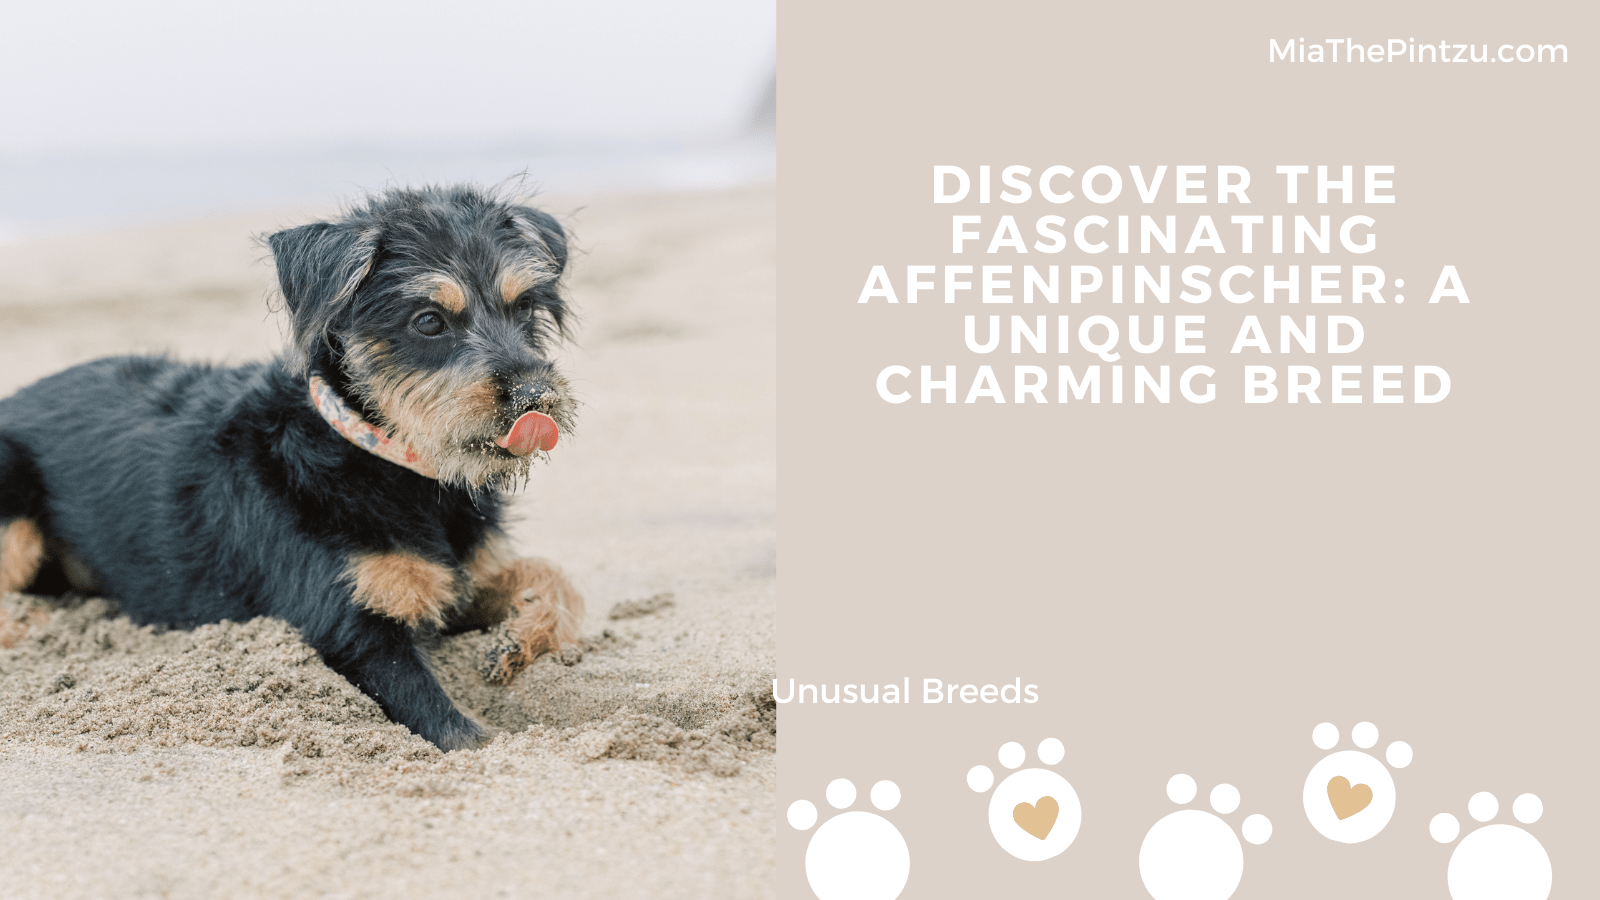 Discover the Fascinating Affenpinscher: A Unique and Charming Breed